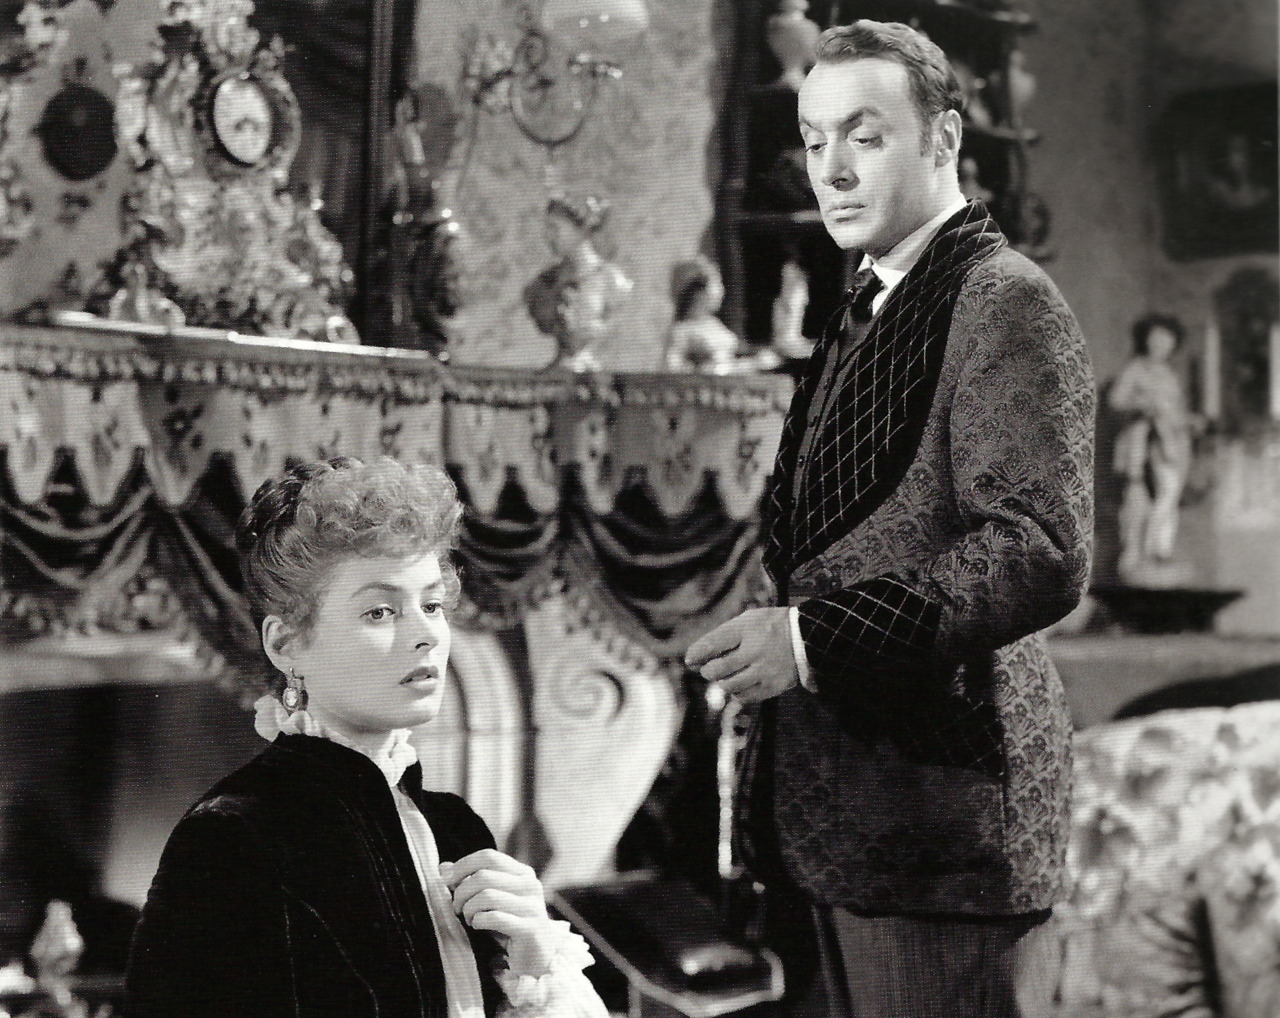 USE-THIS-Coming-to-terms-In-the-1944-film-Gaslight-a-husband-plants-seeds-to-make-his-wife-doubt-her-sanity.jpg